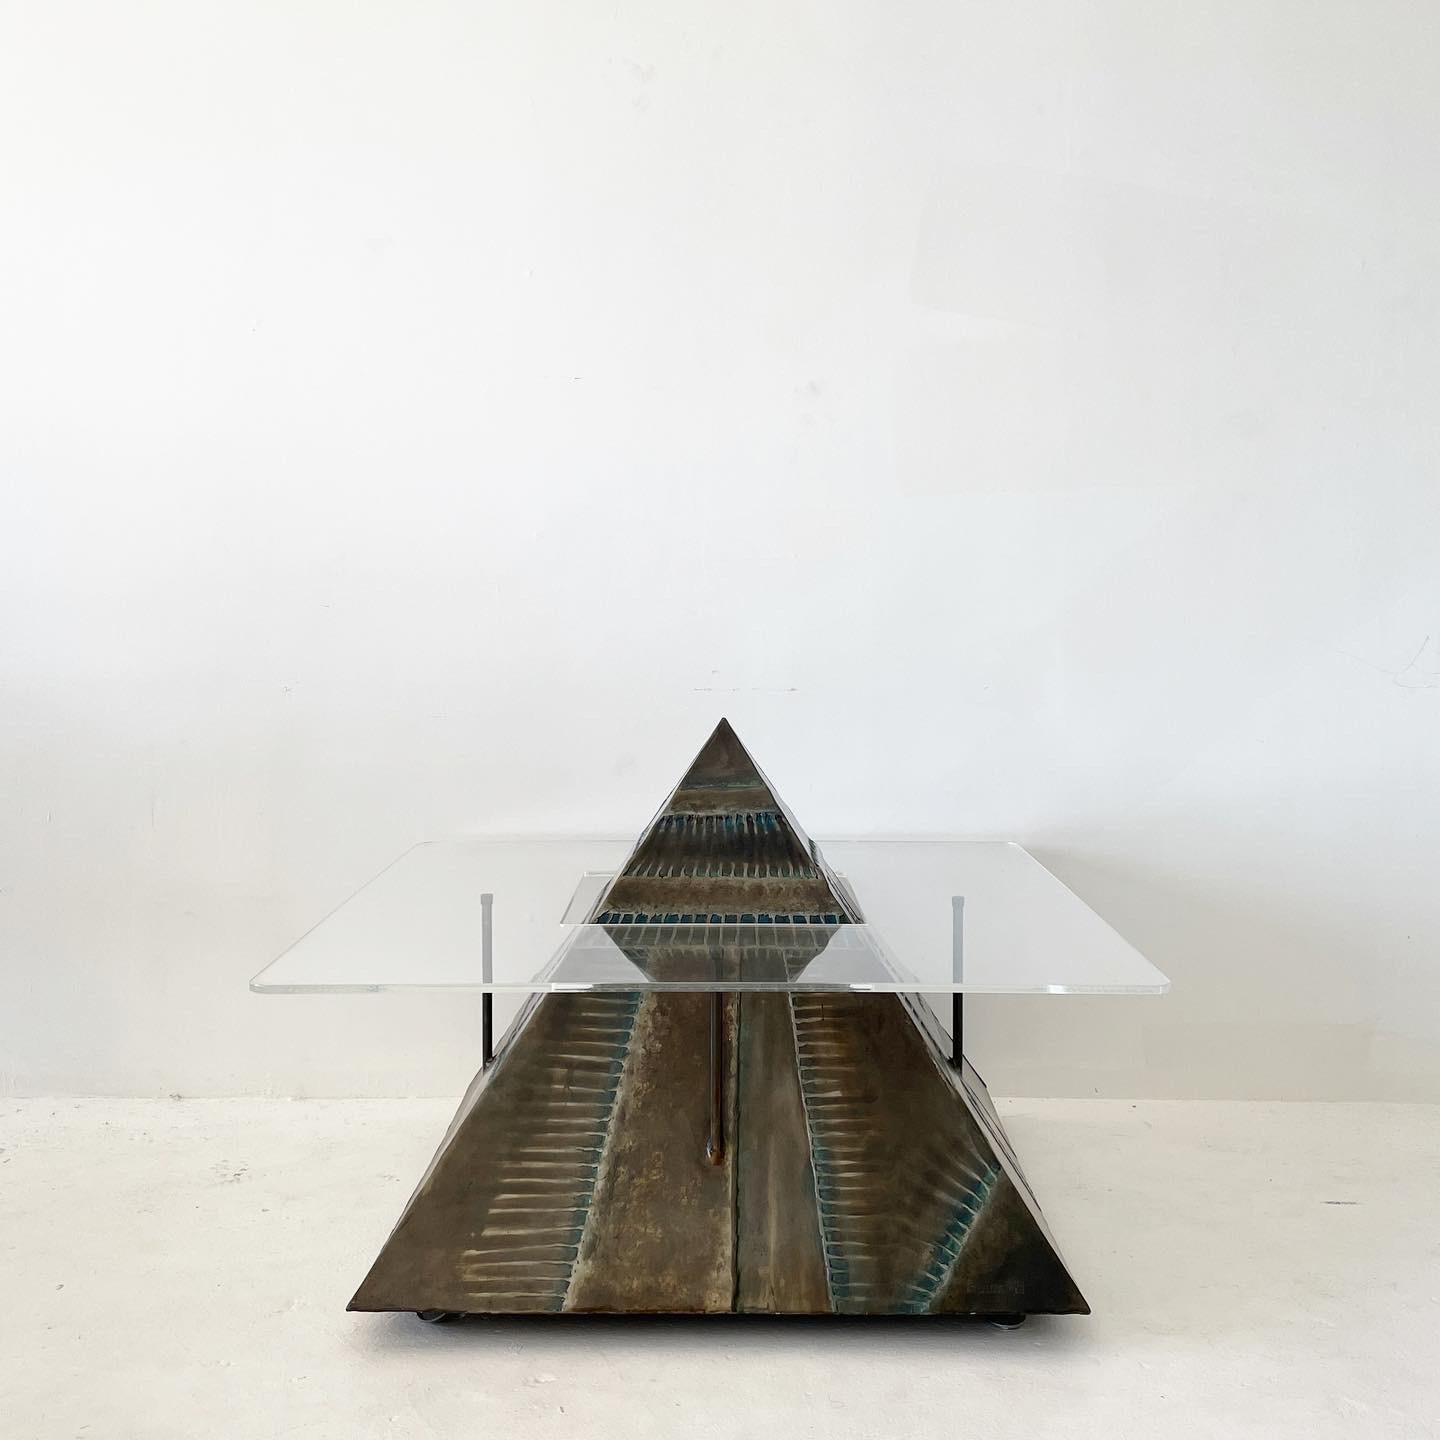 One of a kind, welded metal levitating pyramid coffee table made by a local LA artist. The surface of the sculpture is textured and a burnished bronze finish with some turquoise undertones.

Wrap around lucite table top is 3/4